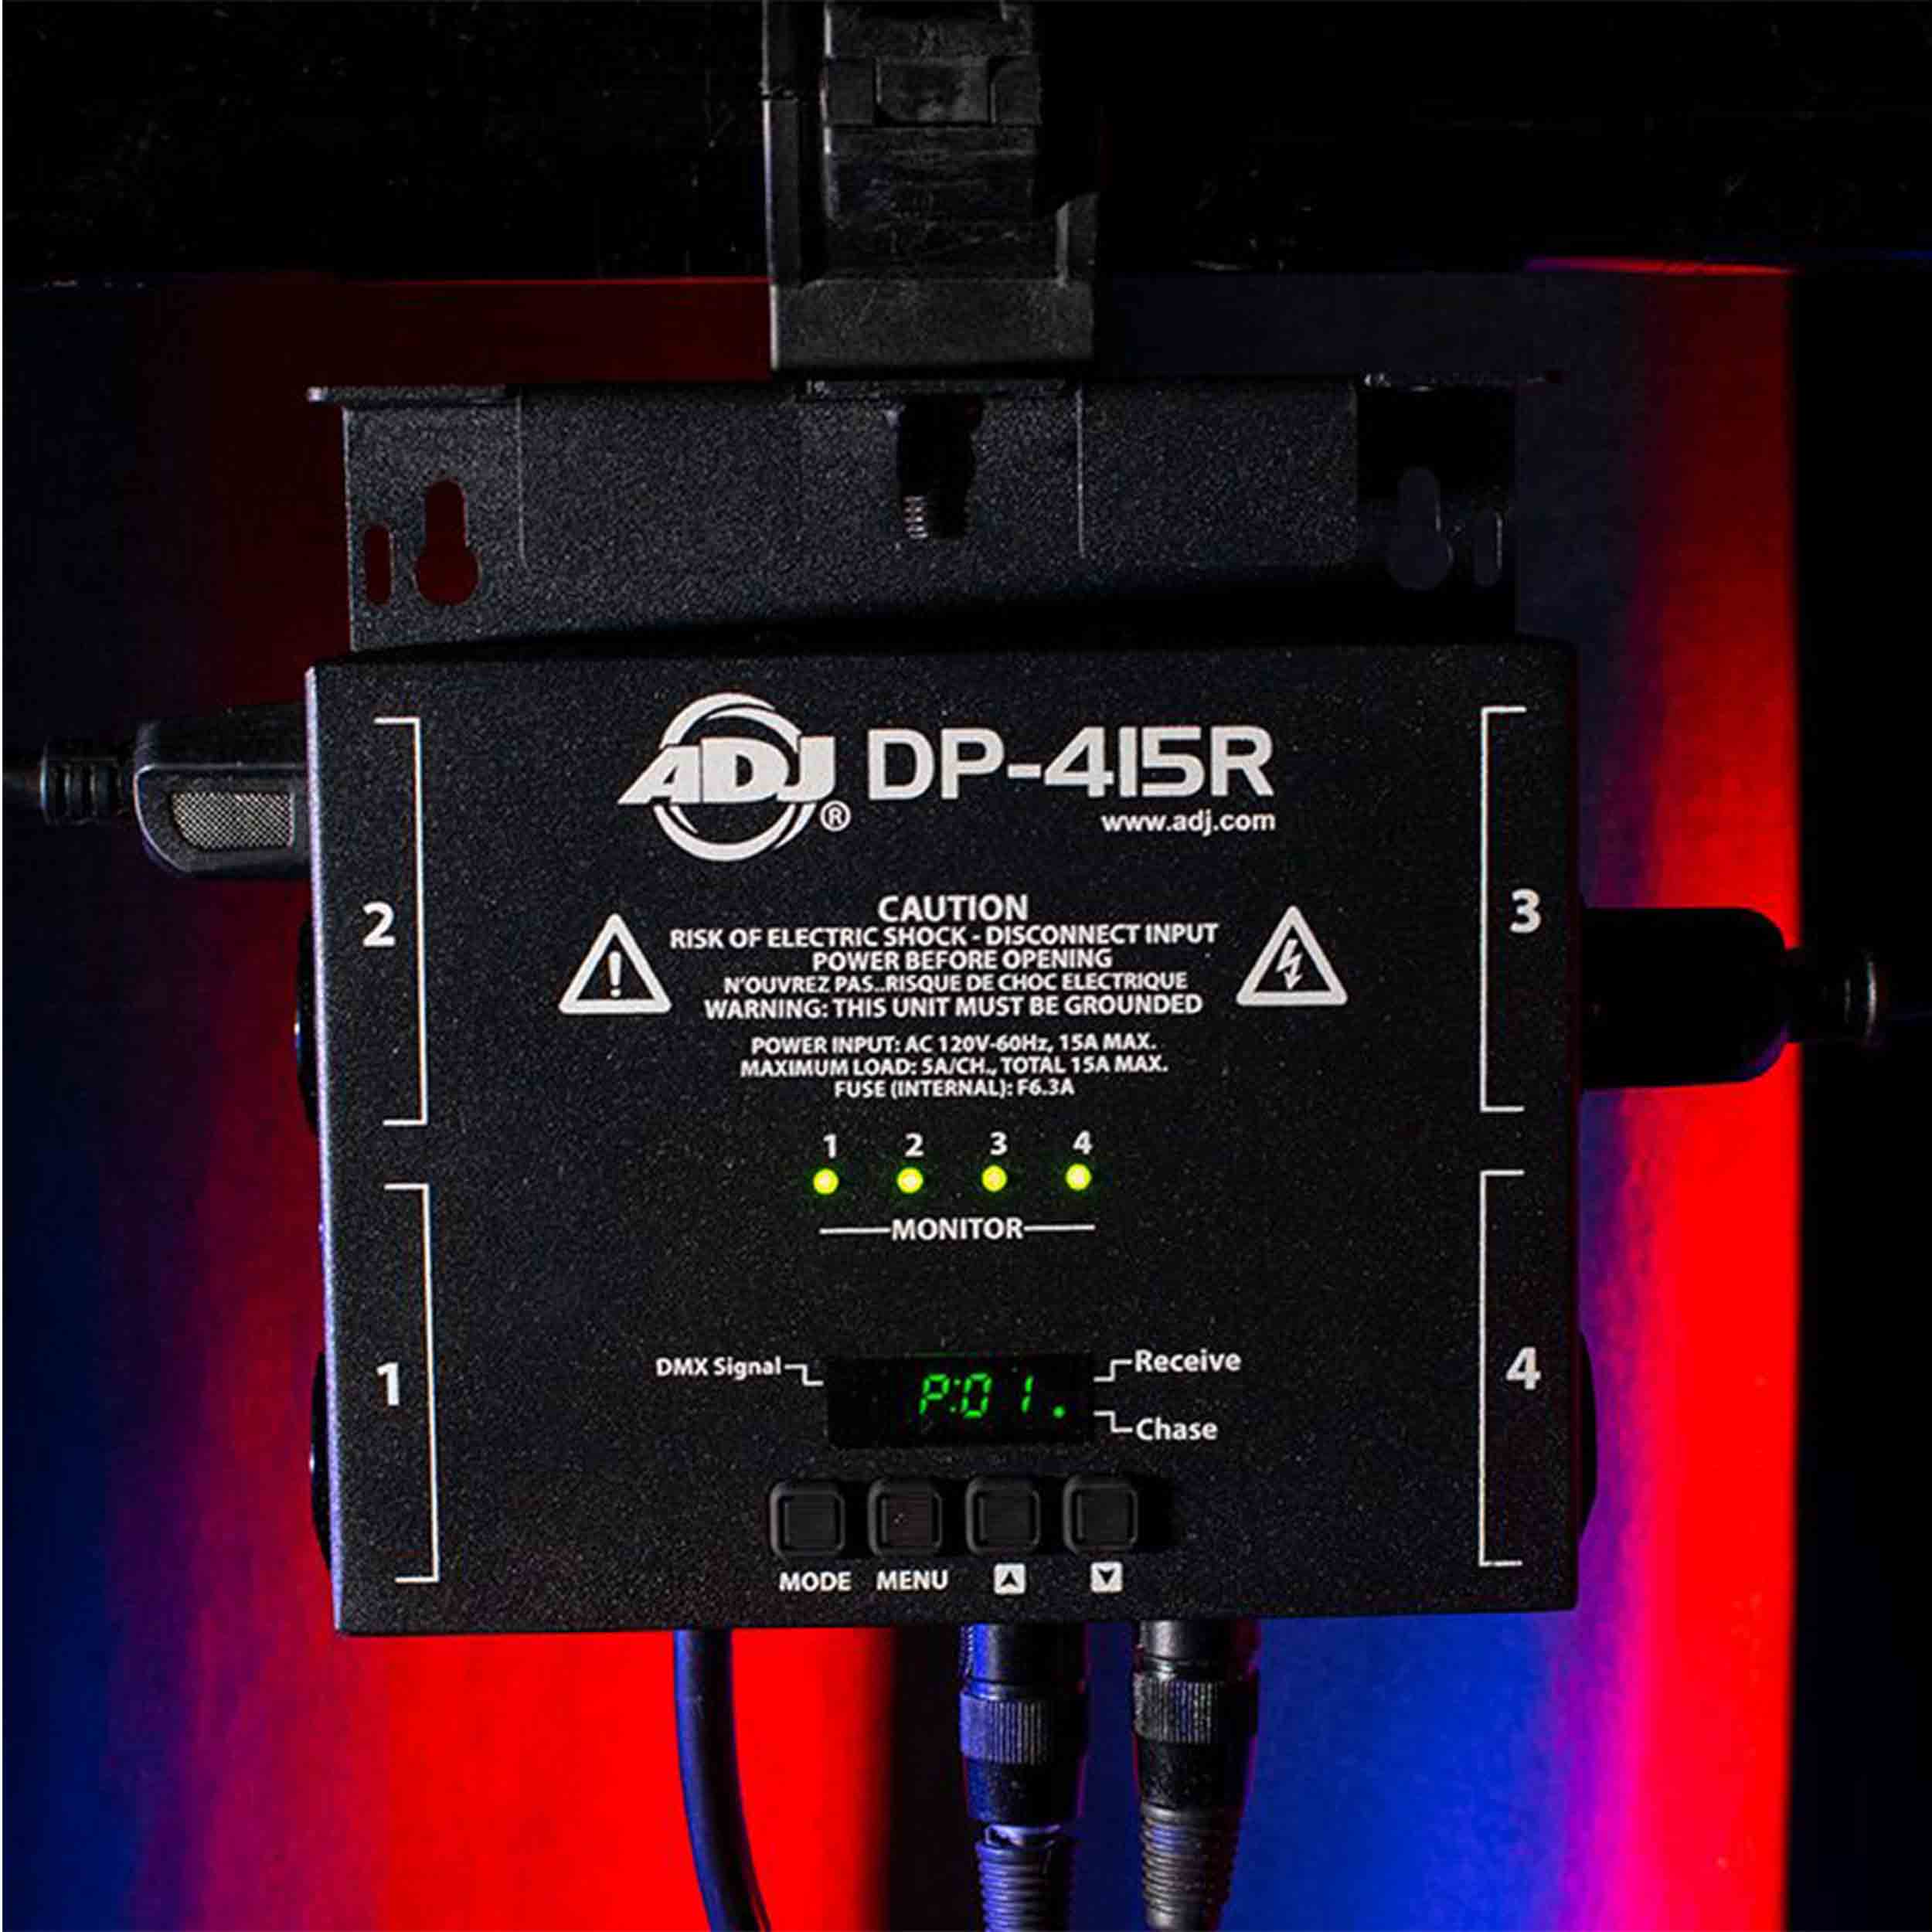 ADJ DP-415R, 4-Channel Dimmer and Switch Pack by ADJ